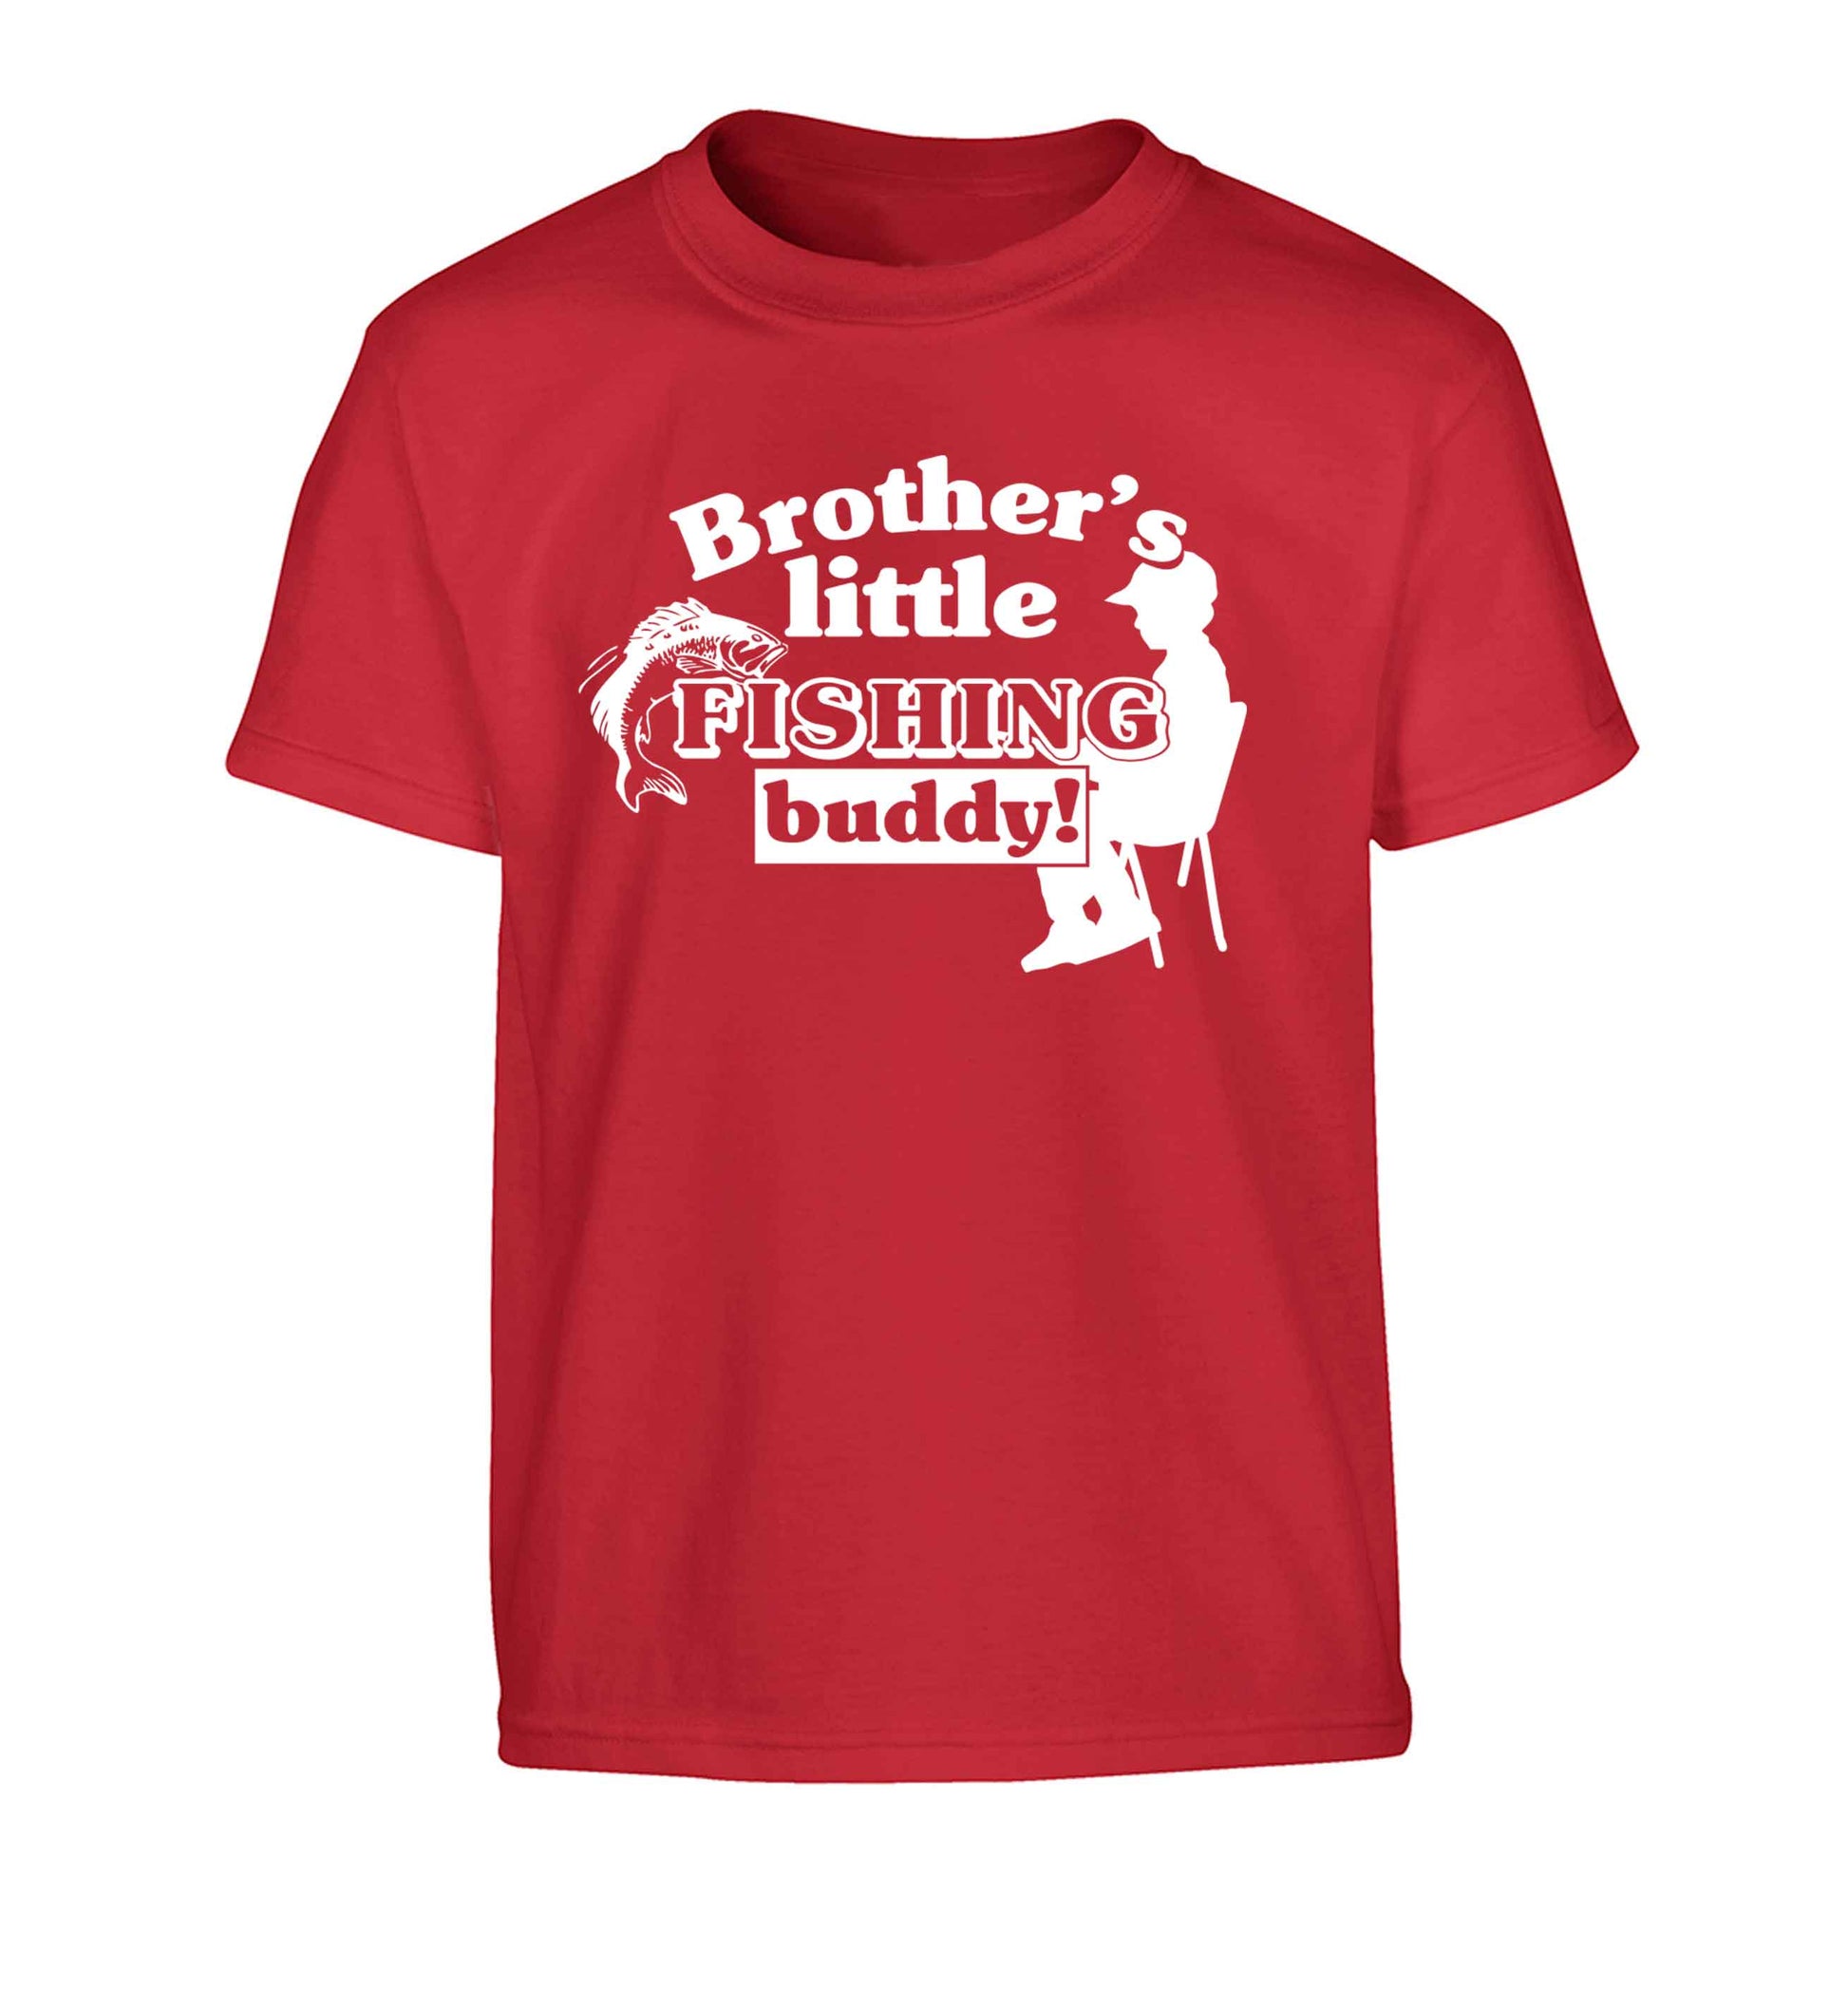 Brother's little fishing buddy Children's red Tshirt 12-13 Years